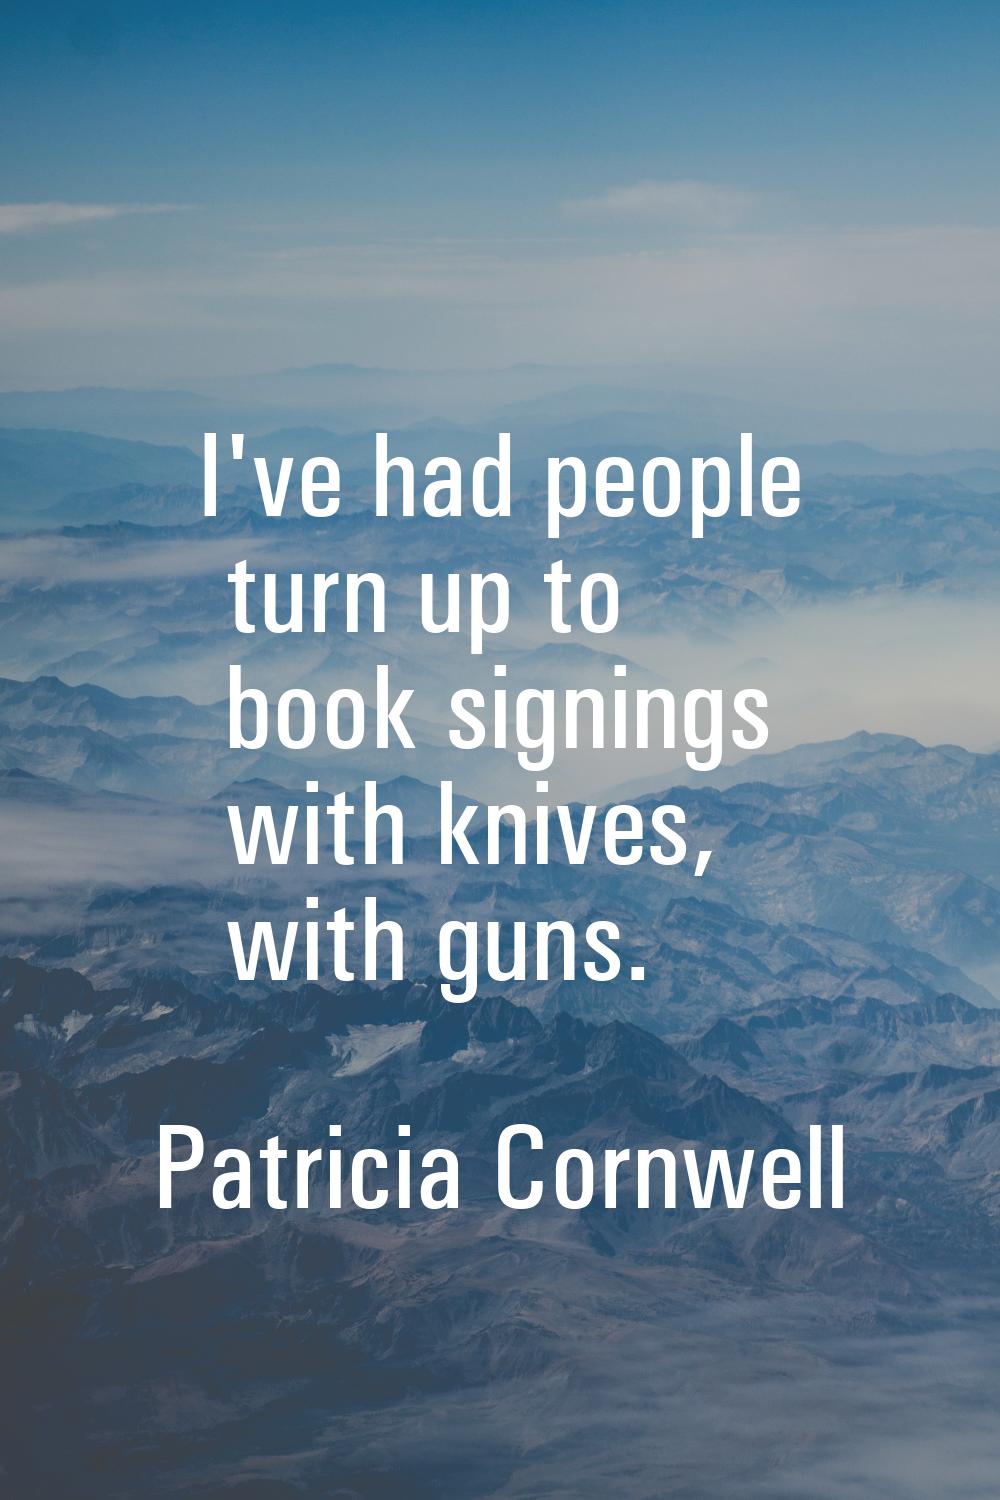 I've had people turn up to book signings with knives, with guns.